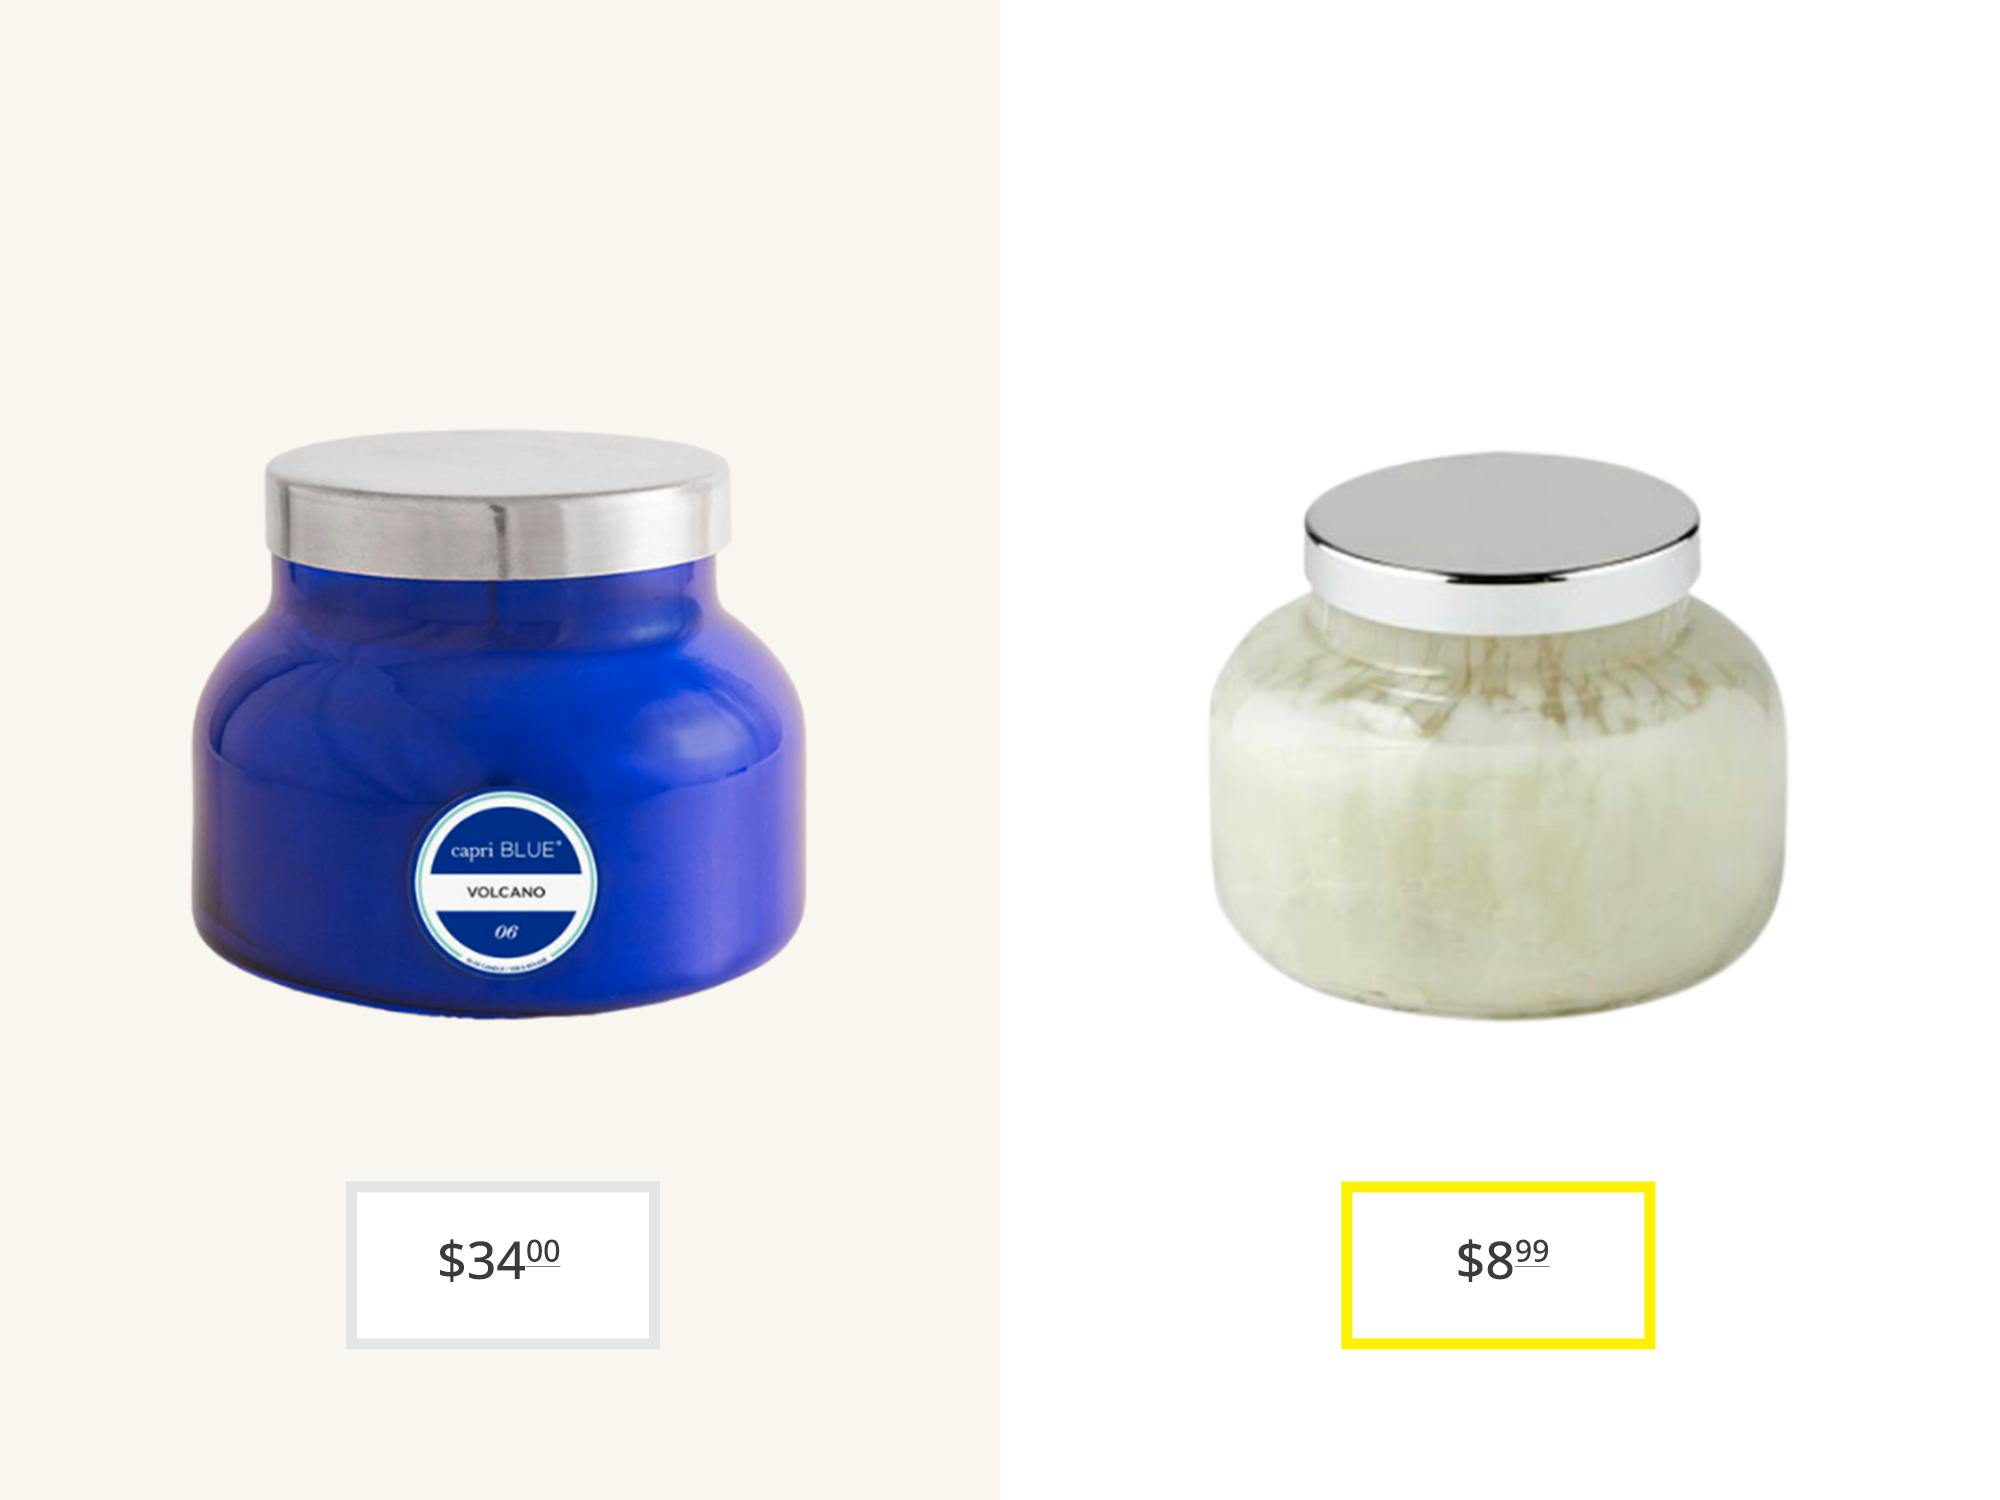 An Anthropologie candle next to an Aldi candle 